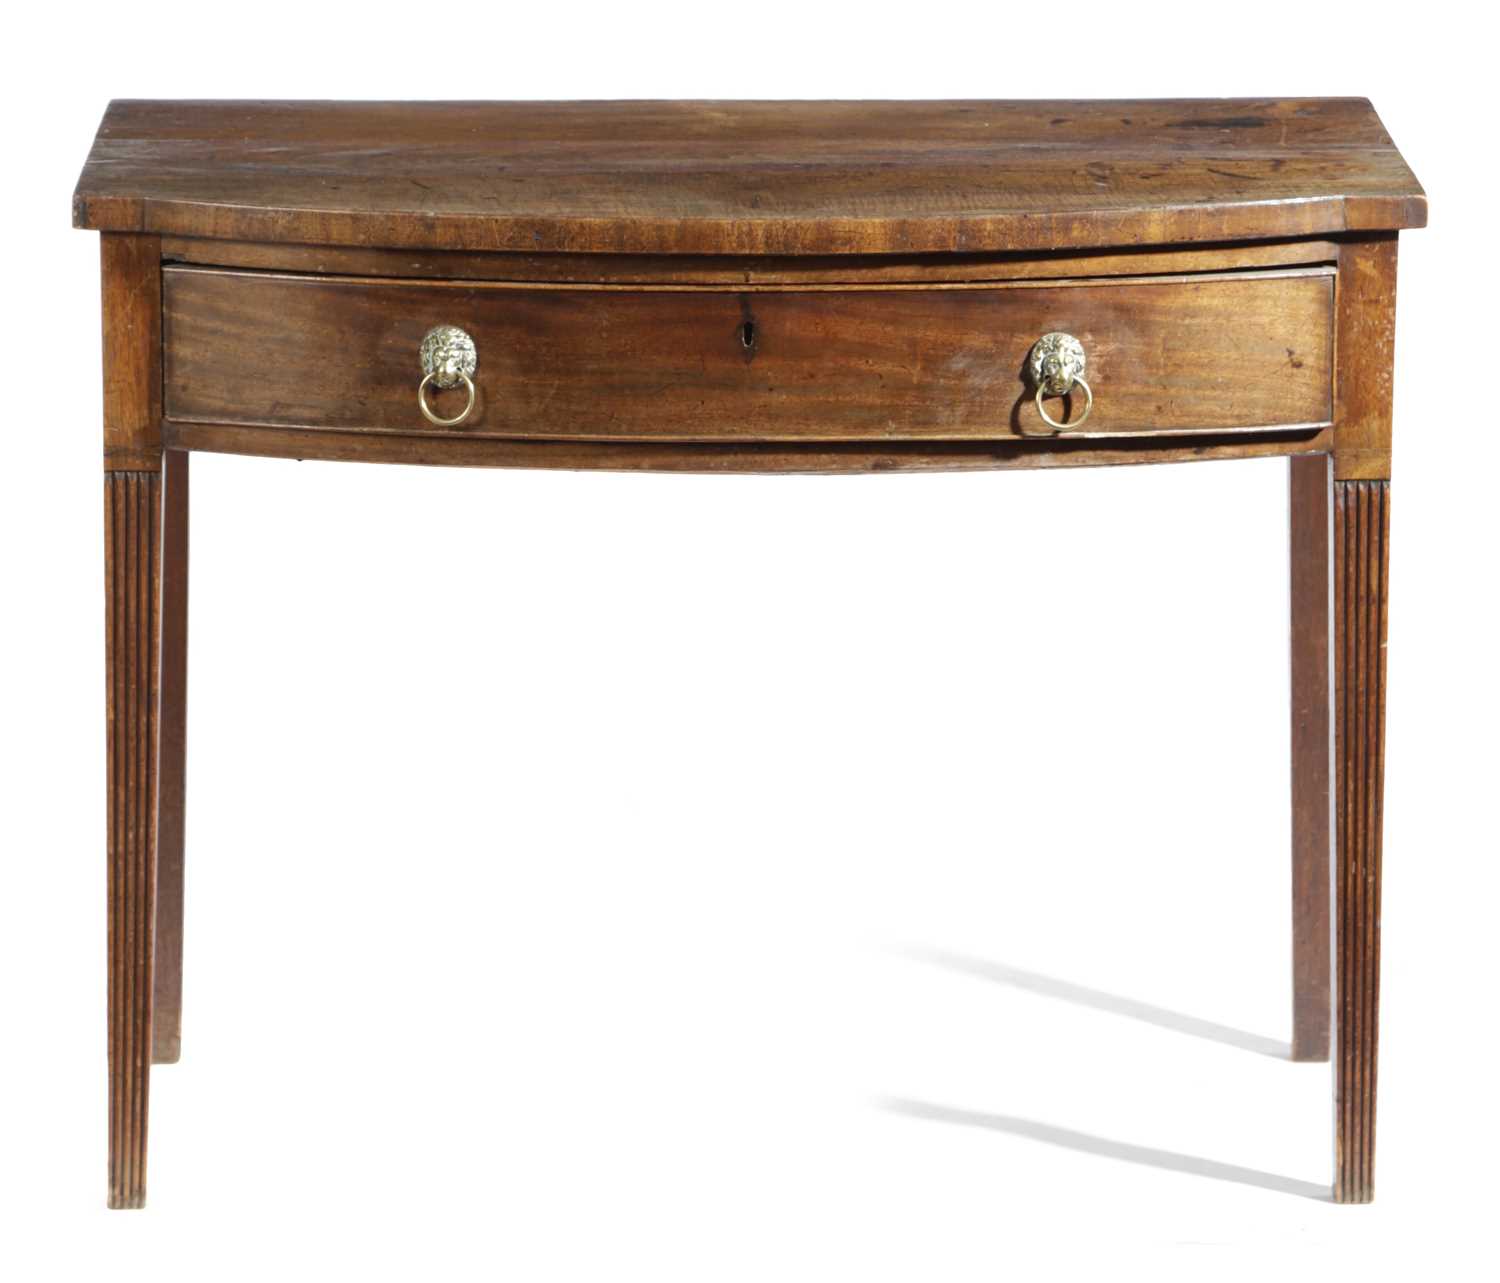 A REGENCY MAHOGANY BOWFRONT SIDE TABLE EARLY 19TH CENTURY with a frieze drawer above ribbed square